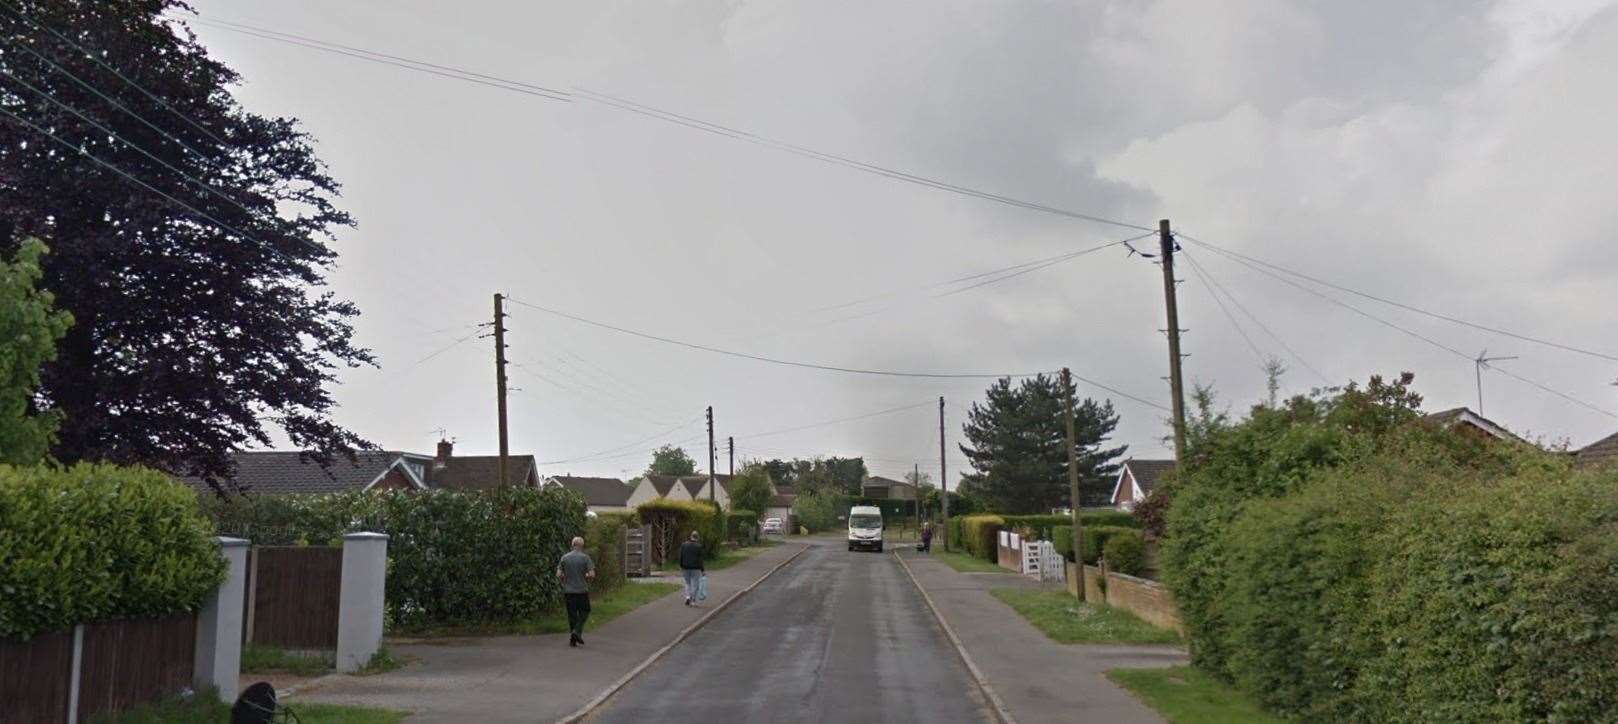 The exposure happened in Hever Avenue, West Kingsdown. Picture: Google Maps